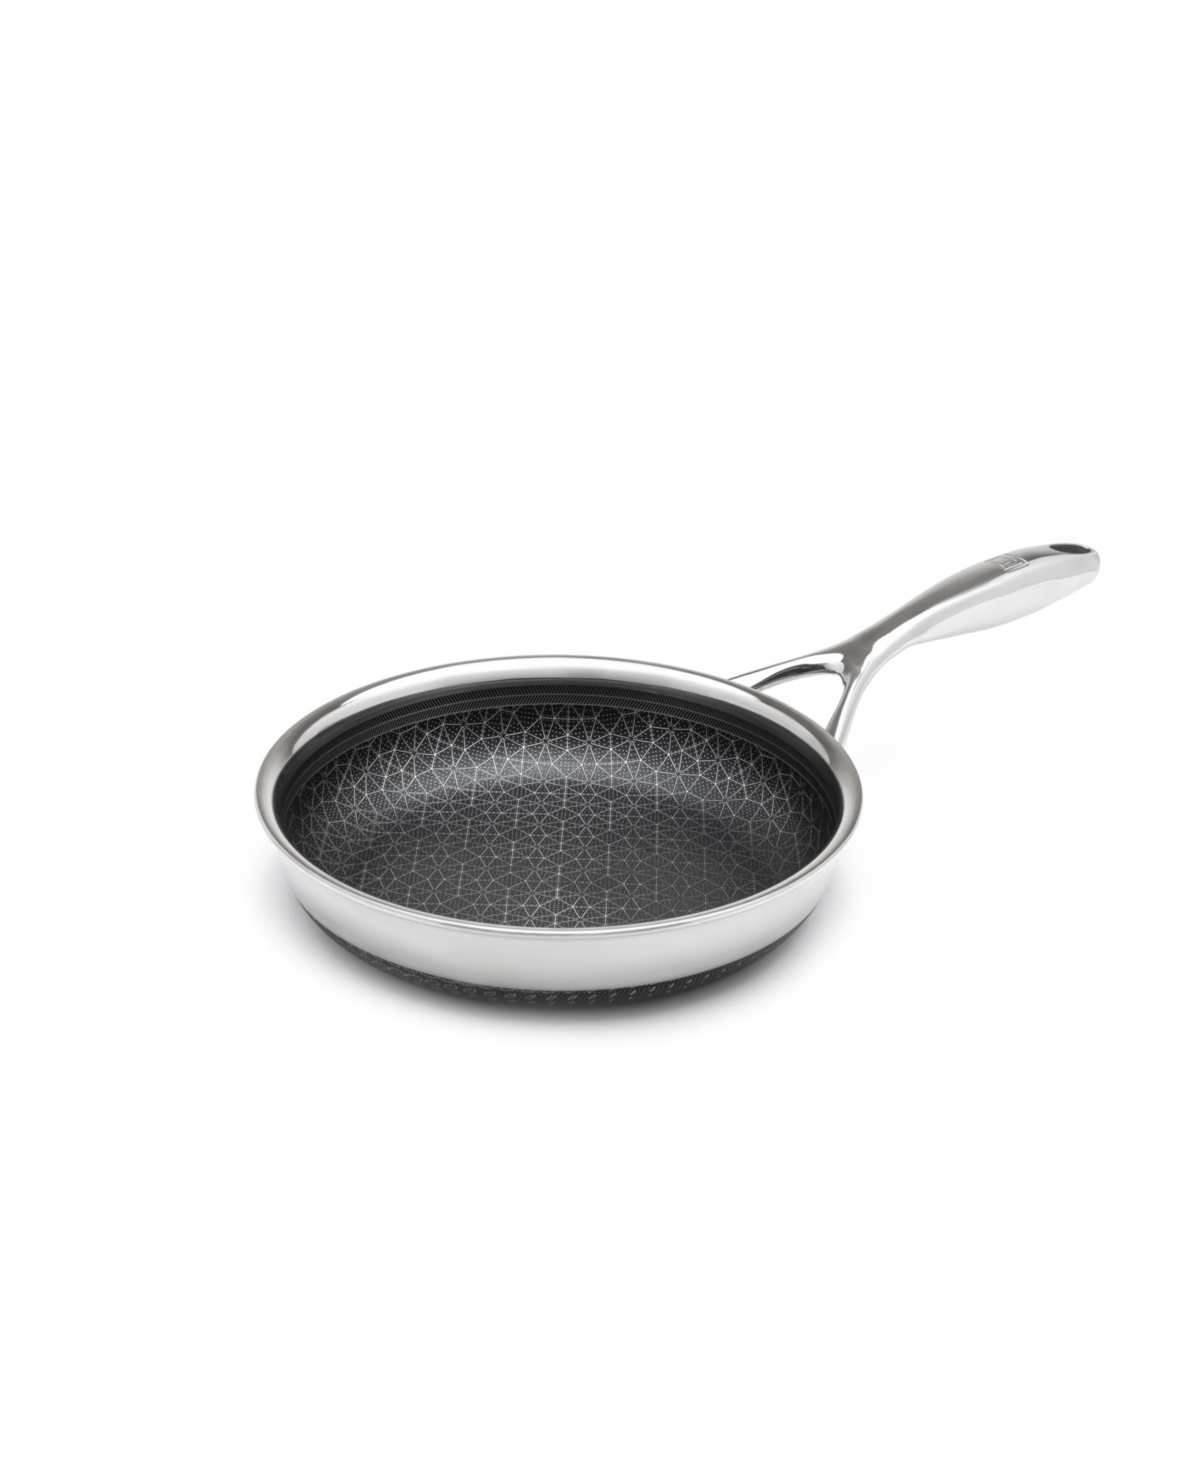 Livwell Diamondclad Stainless Steel Aluminum Core 8" Hybrid Pan In Silver,black